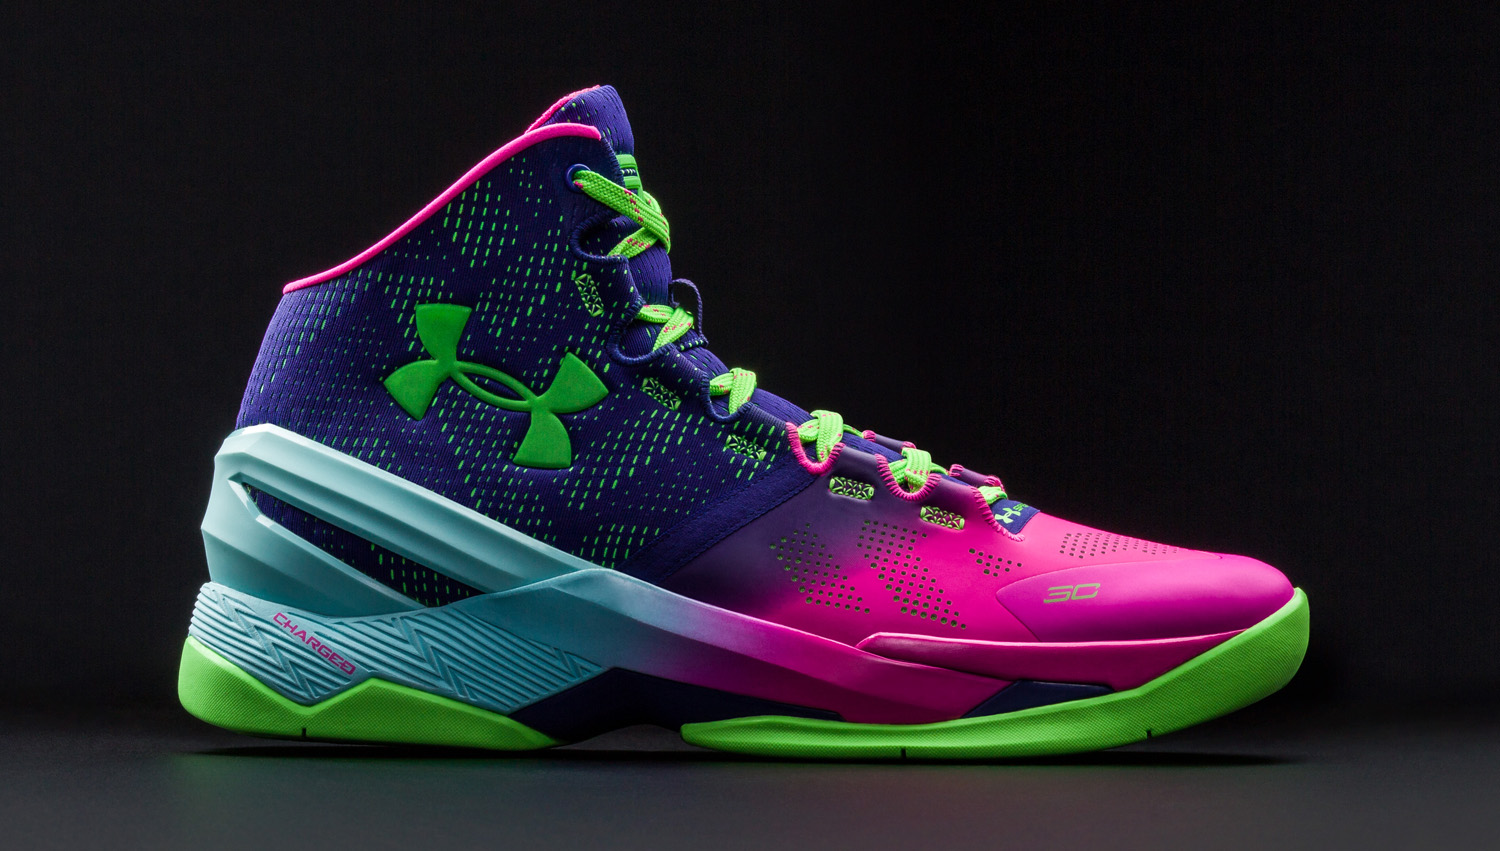 Under Armour Curry Two Shoes Curry 2 “Suit & Tie